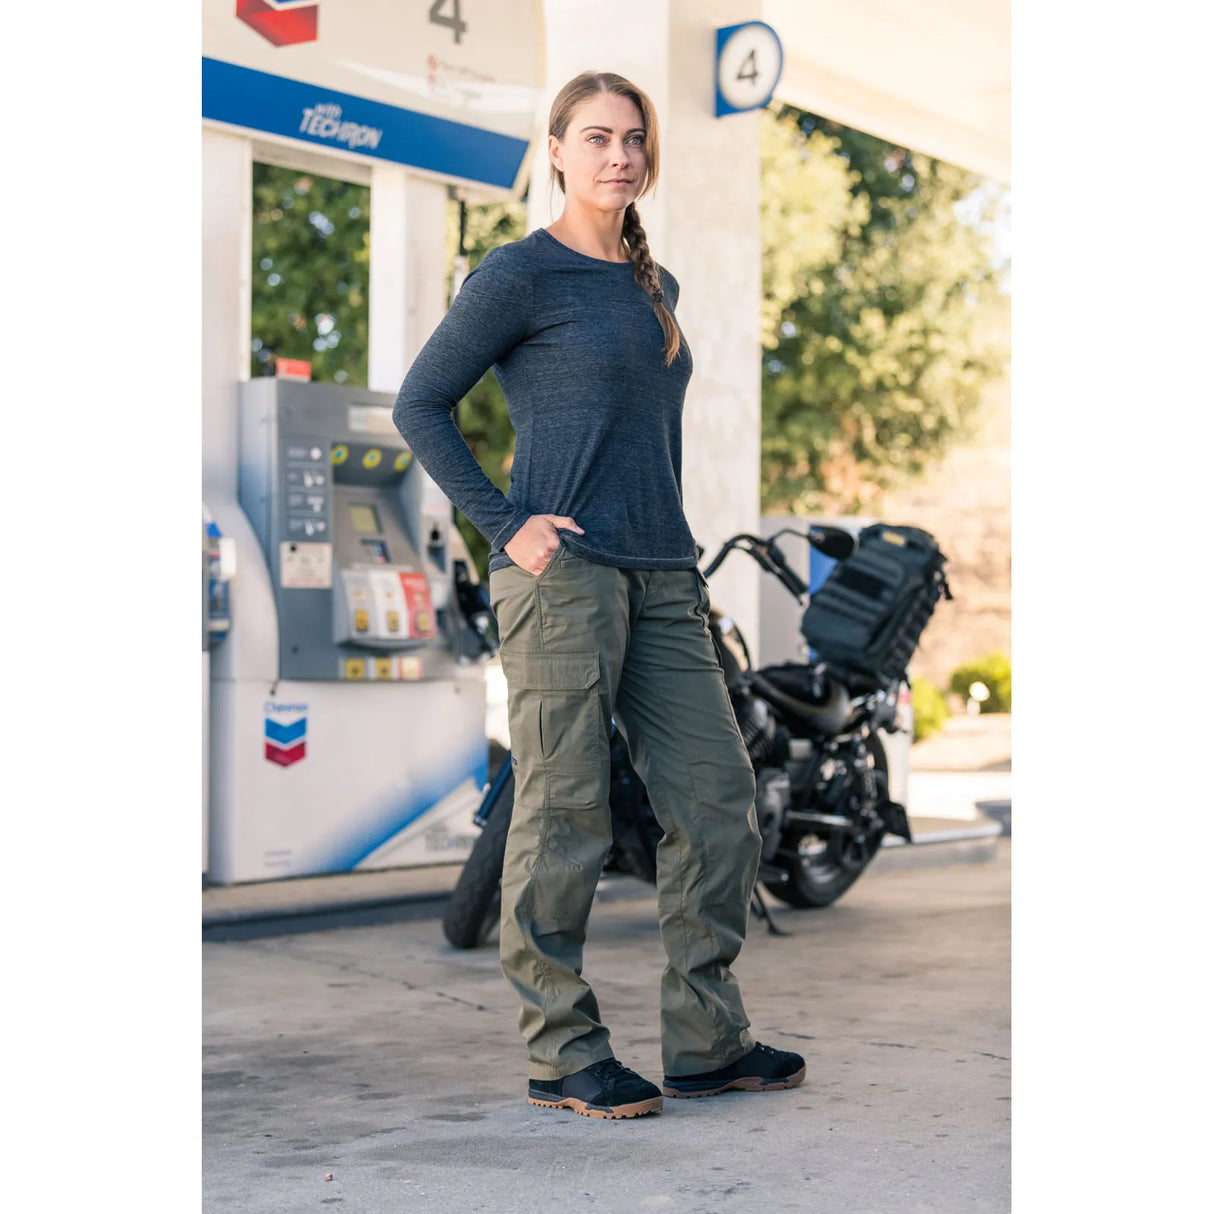 Double-Reinforced Seat and Knee Pant: Provides extra strength and durability.